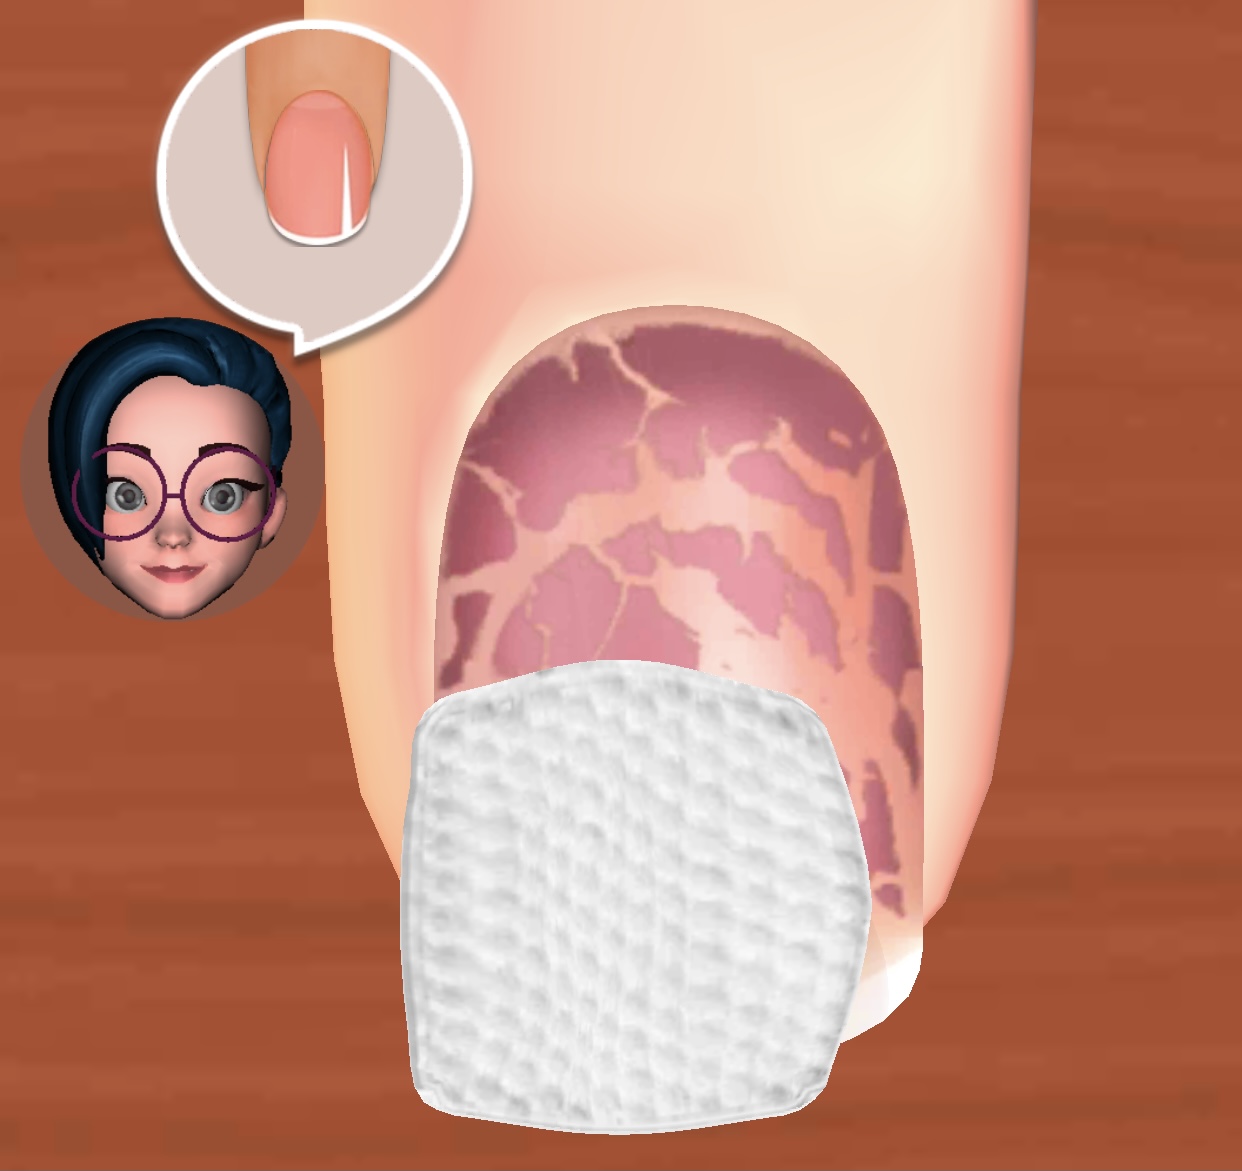 Nail Salon Hints, Tips and Cheats – How to Serve Celebrities, Fix Your Salon and More